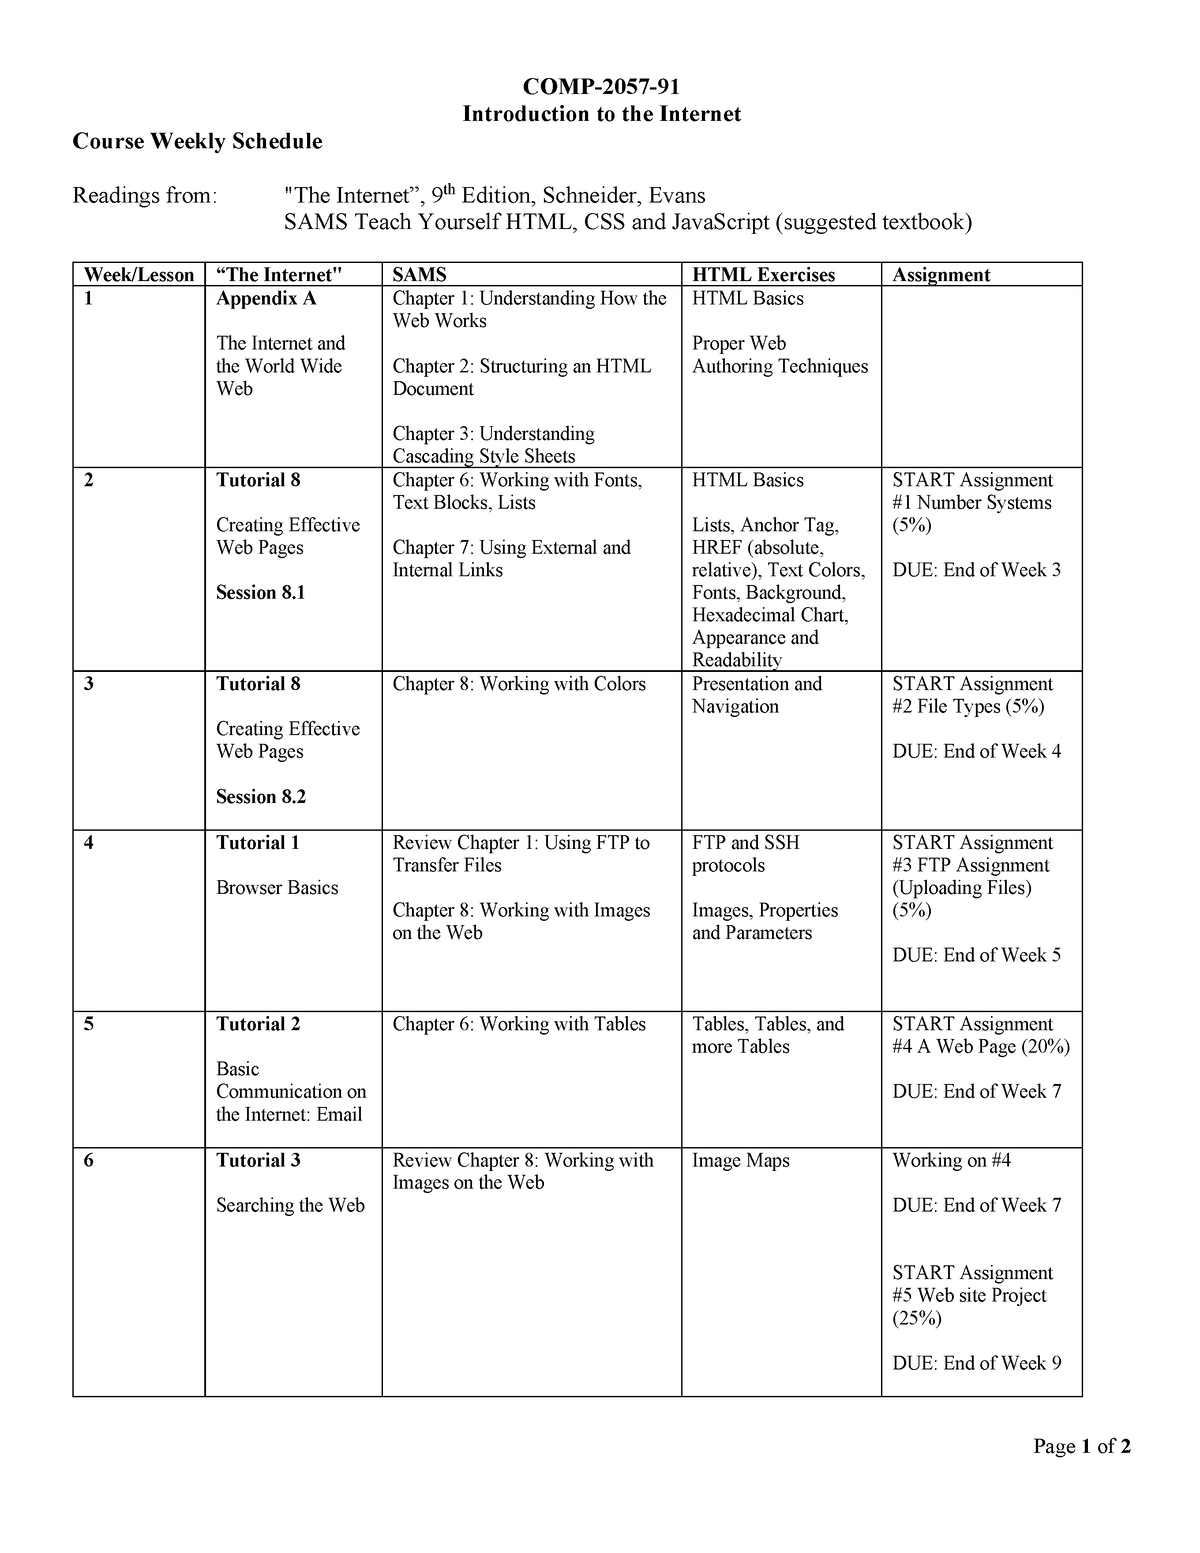 Course Schedule COMP205791 university of windsor Page 1 of 2 COMP